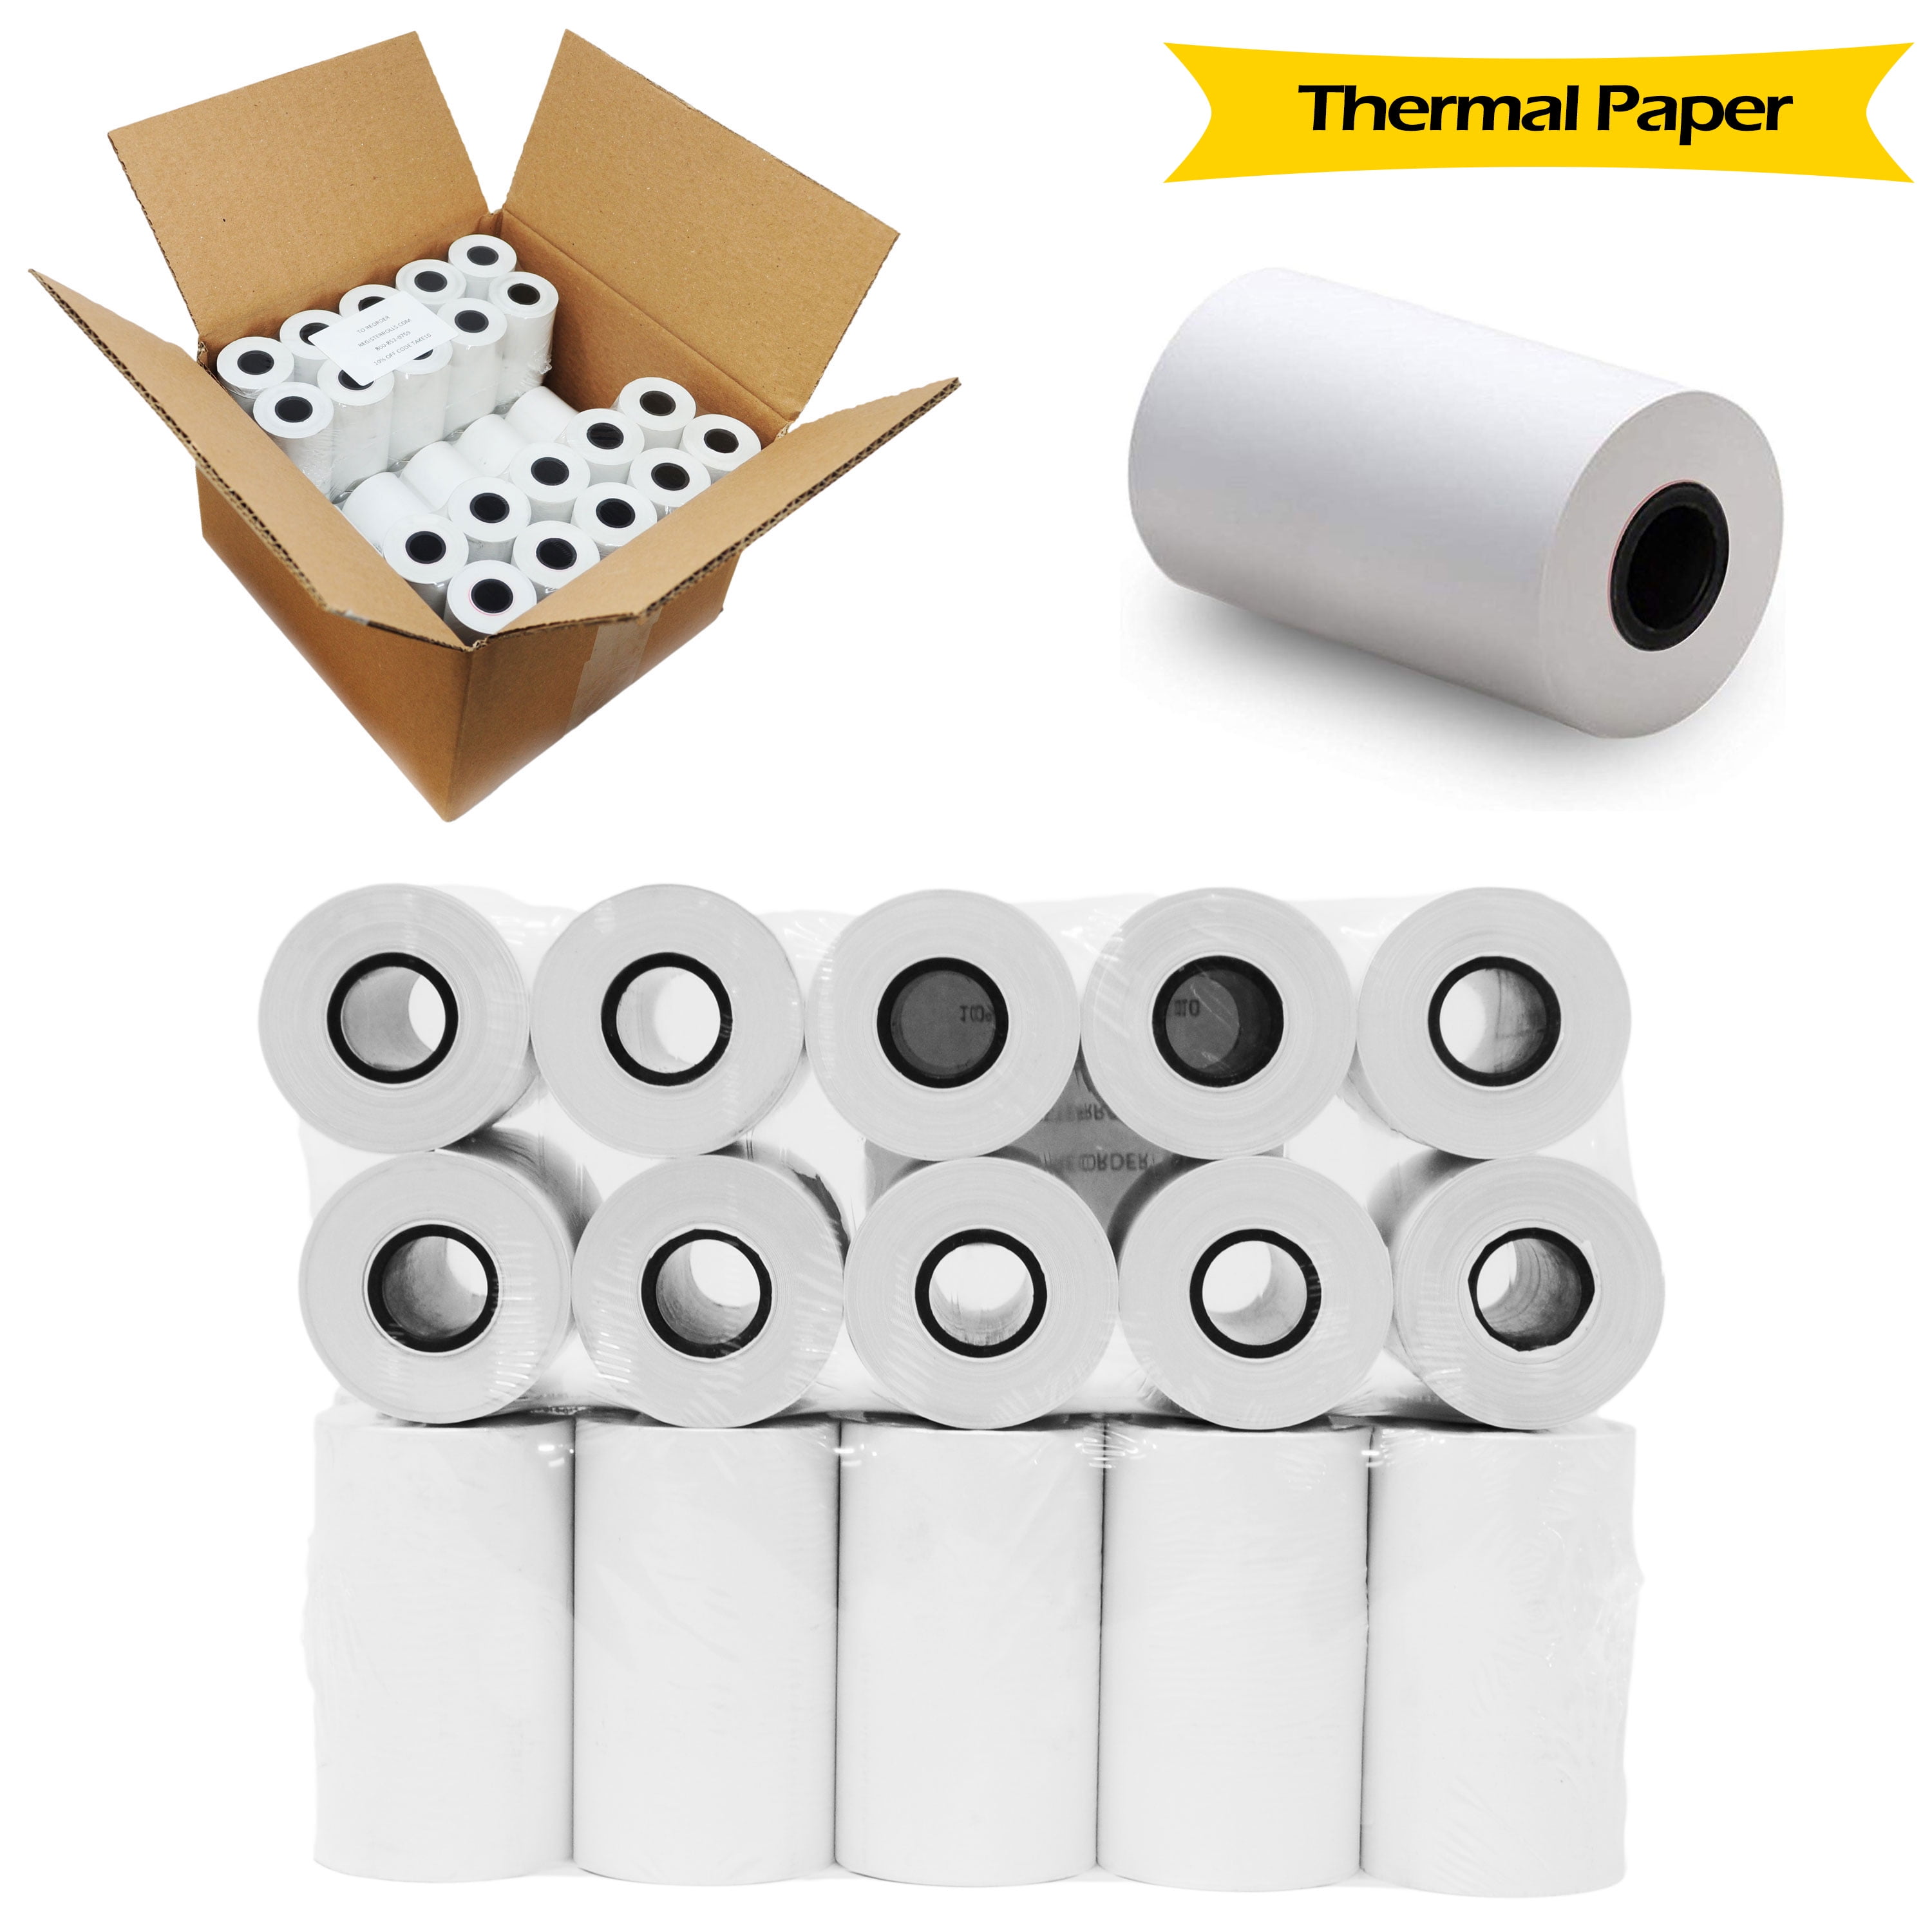 SAM4S THERMAL CASH REGISTER PAPER 2-1/4" x 150' 50 ROLLS  *FREE SHIPPING* 